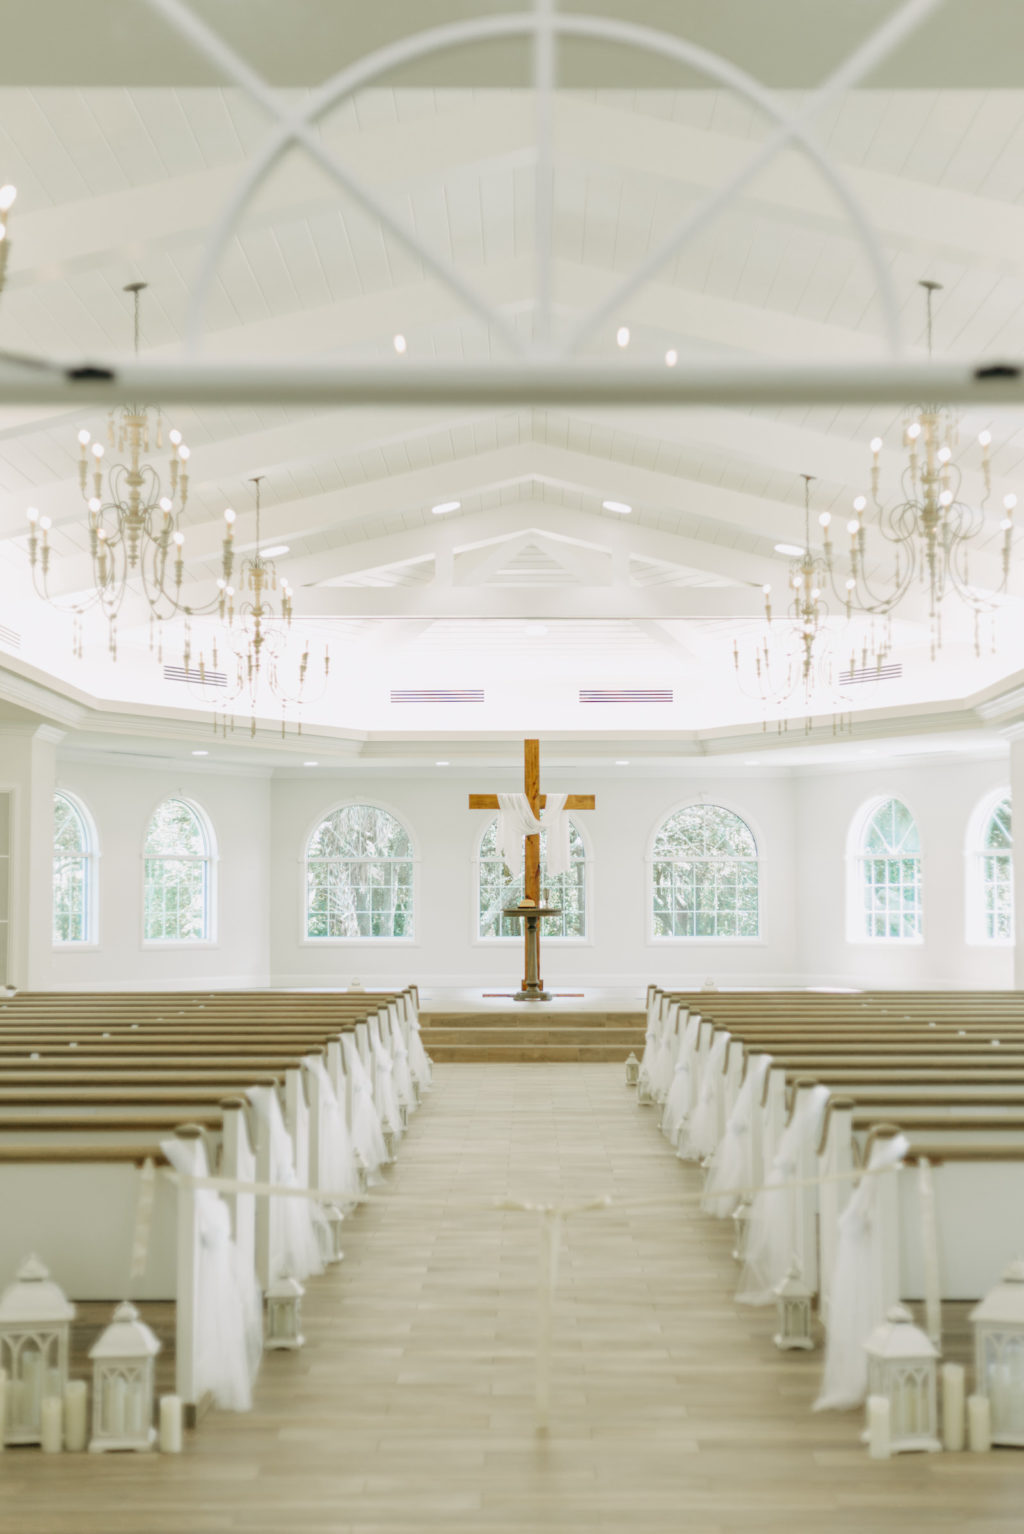 Traditional Wedding Ceremony Decor, White Lanterns with Candles, Wooden Cross at Altar | Safety Harbor Wedding Venue Harborside Chapel | Tampa Bay Wedding Photographer Amber McWhorter Photography